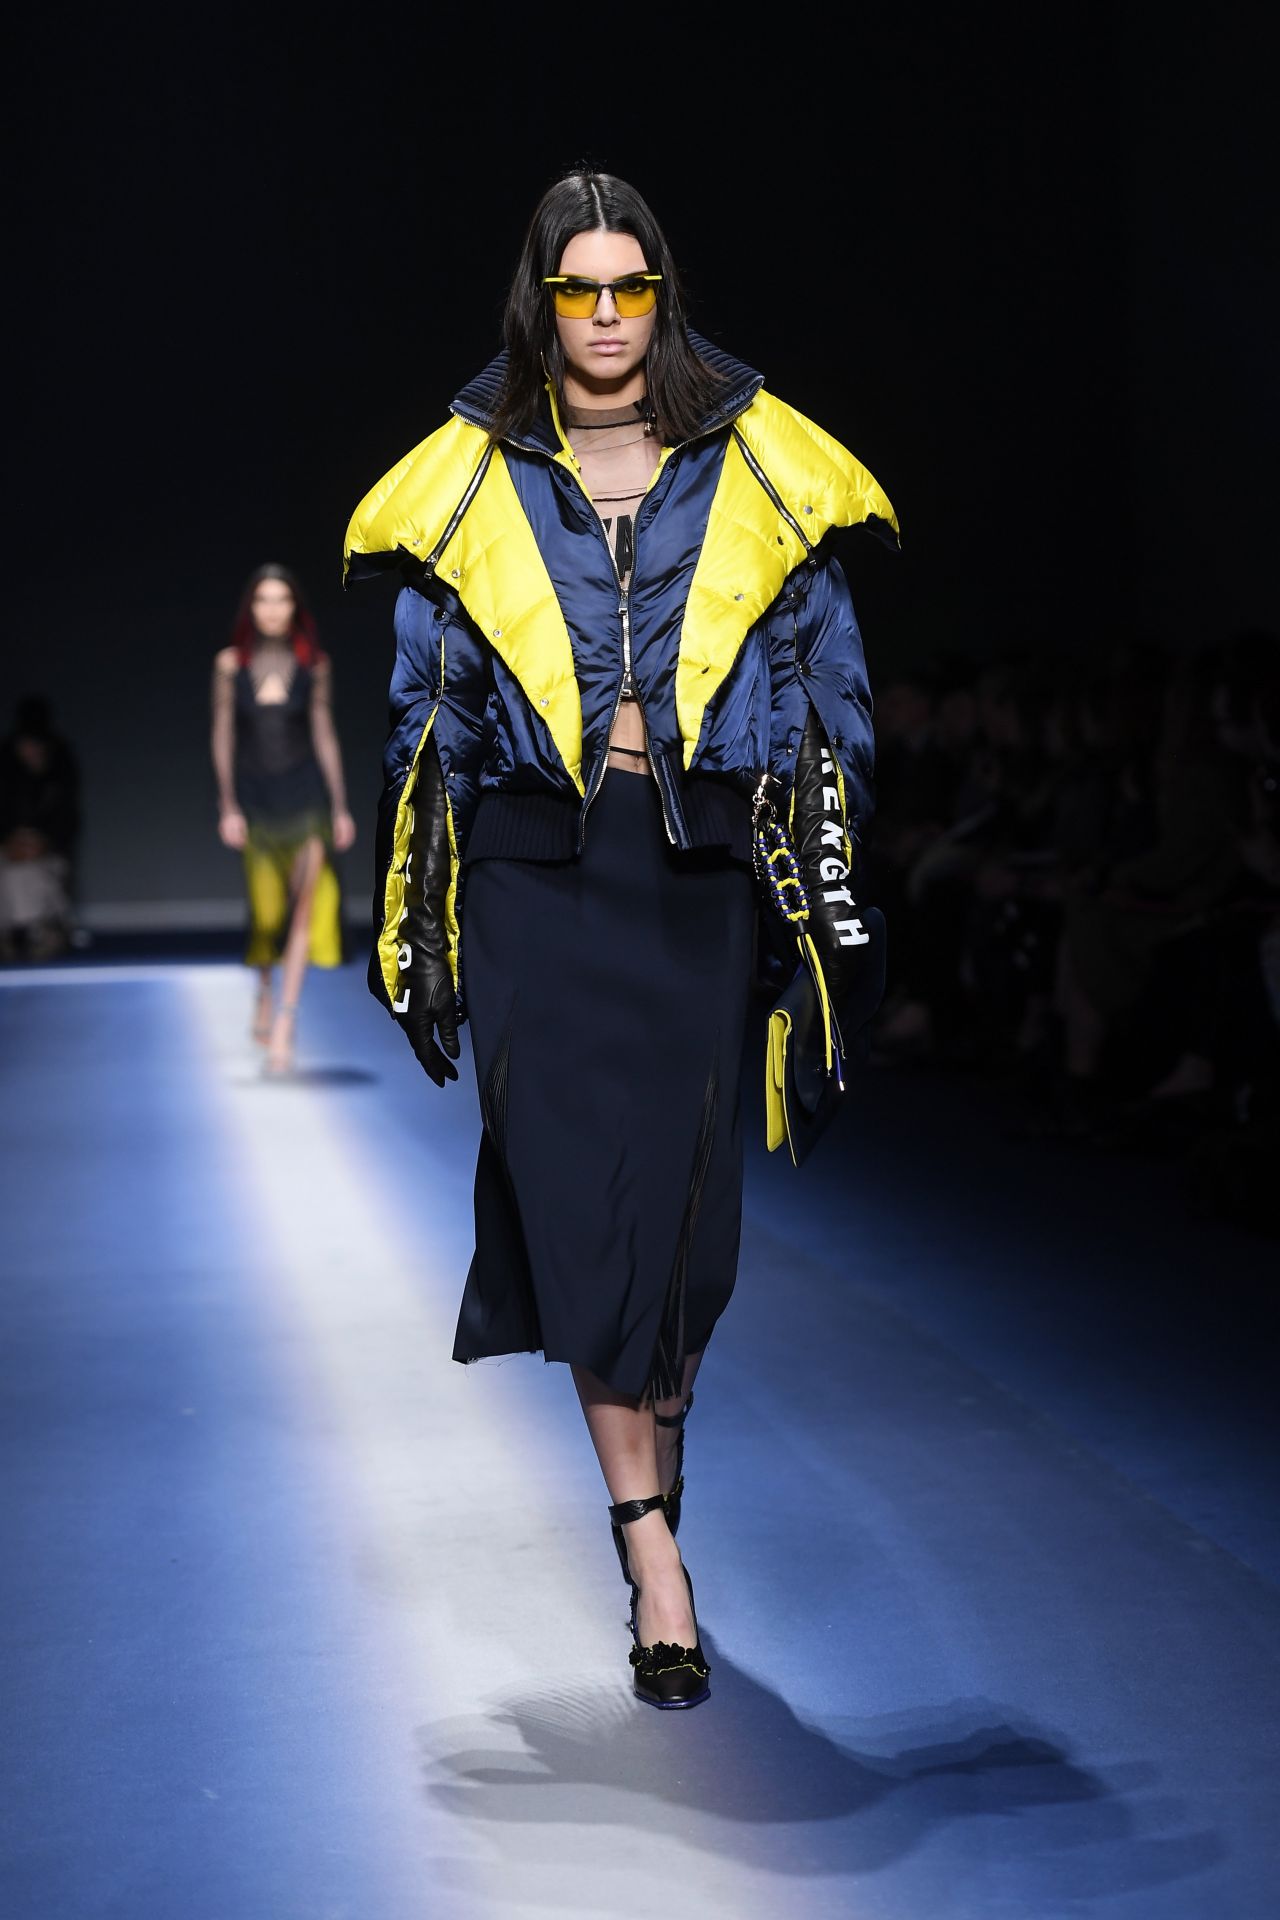 Kendall Jenner Walks the Runway at the Versace Show - Milan Fashion ...